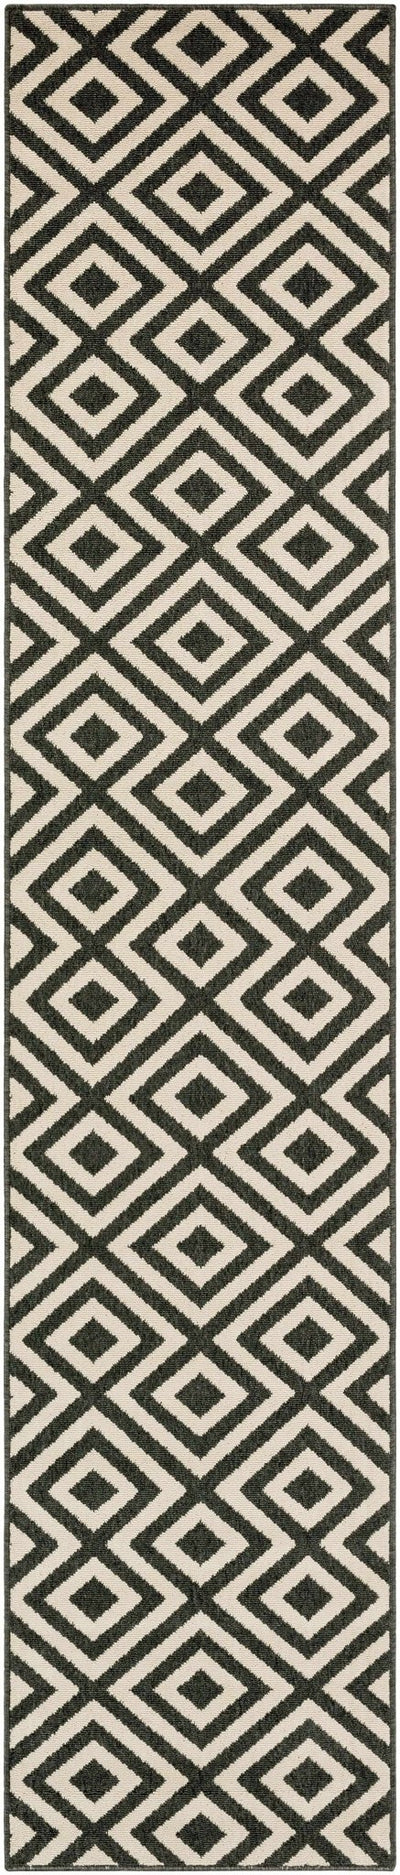 Outdoor Safe Modern Geometric Beige and Charcoal Multi size Area Rug - The Rug Decor